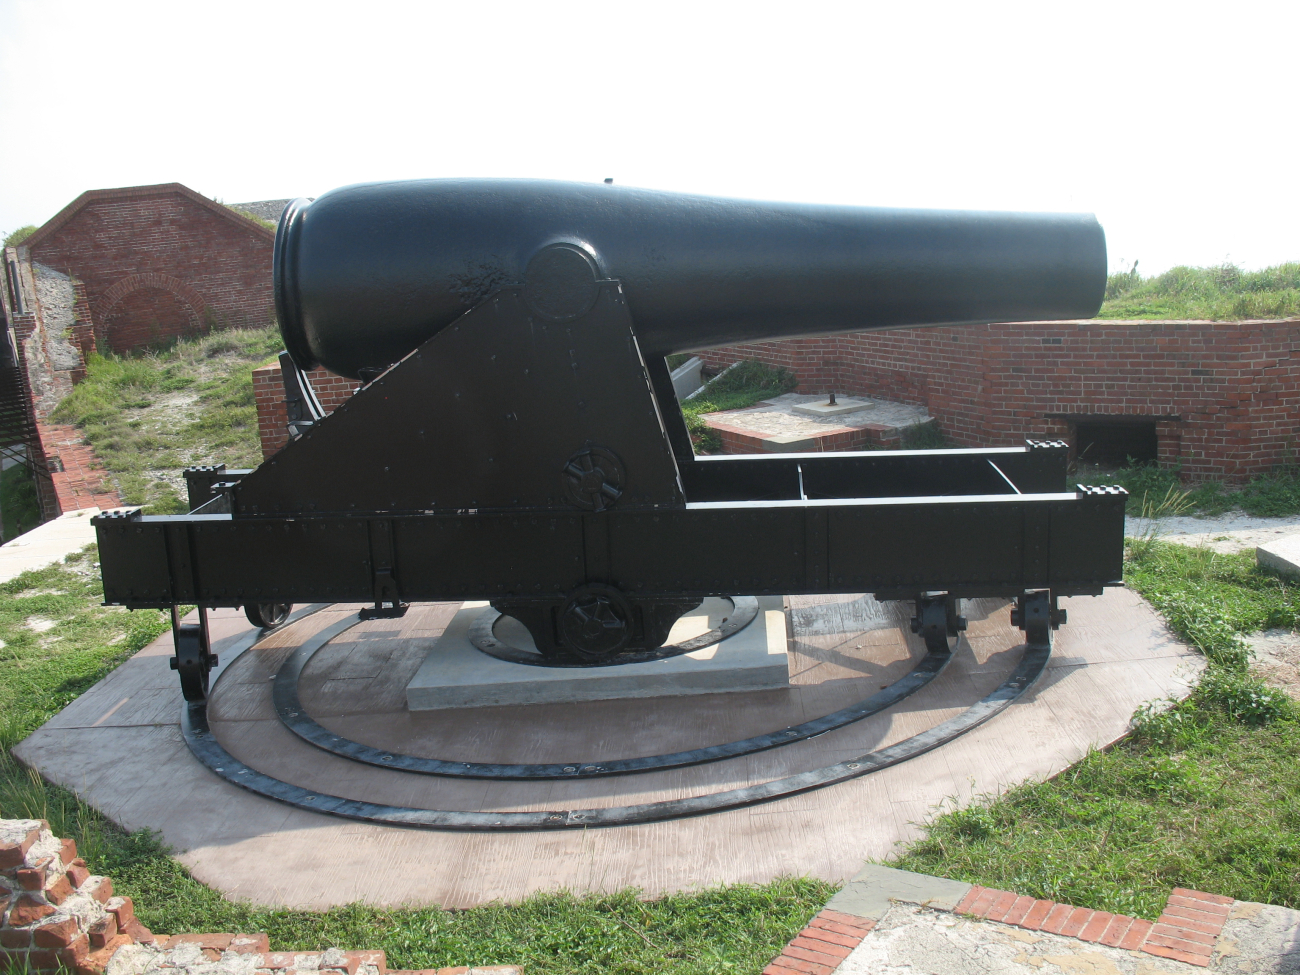 Dalhgren cannon mounted at Fort Jefferson